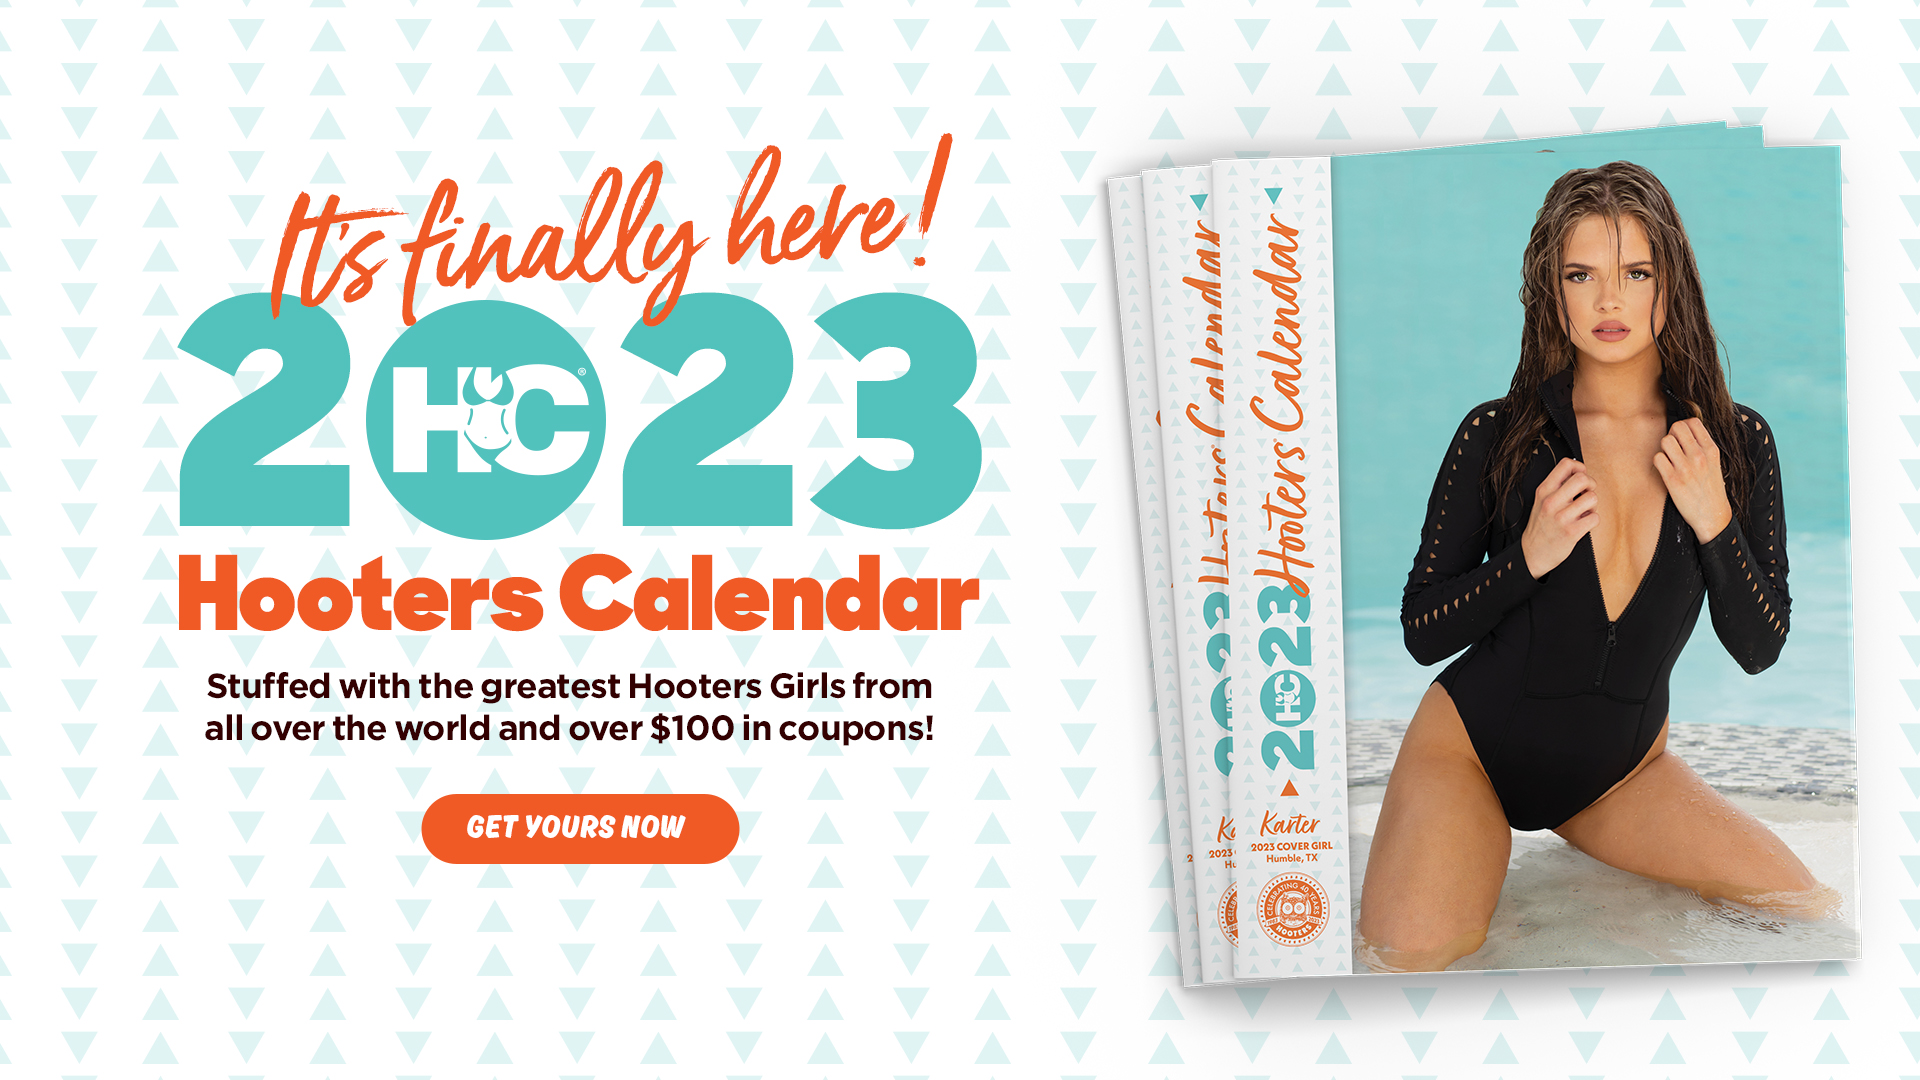 2023 looks good from here. It's time to get your new Hooters Calendar! With over $100 worth of coupons and over 200 Hooters Girls, it's a solid investment.